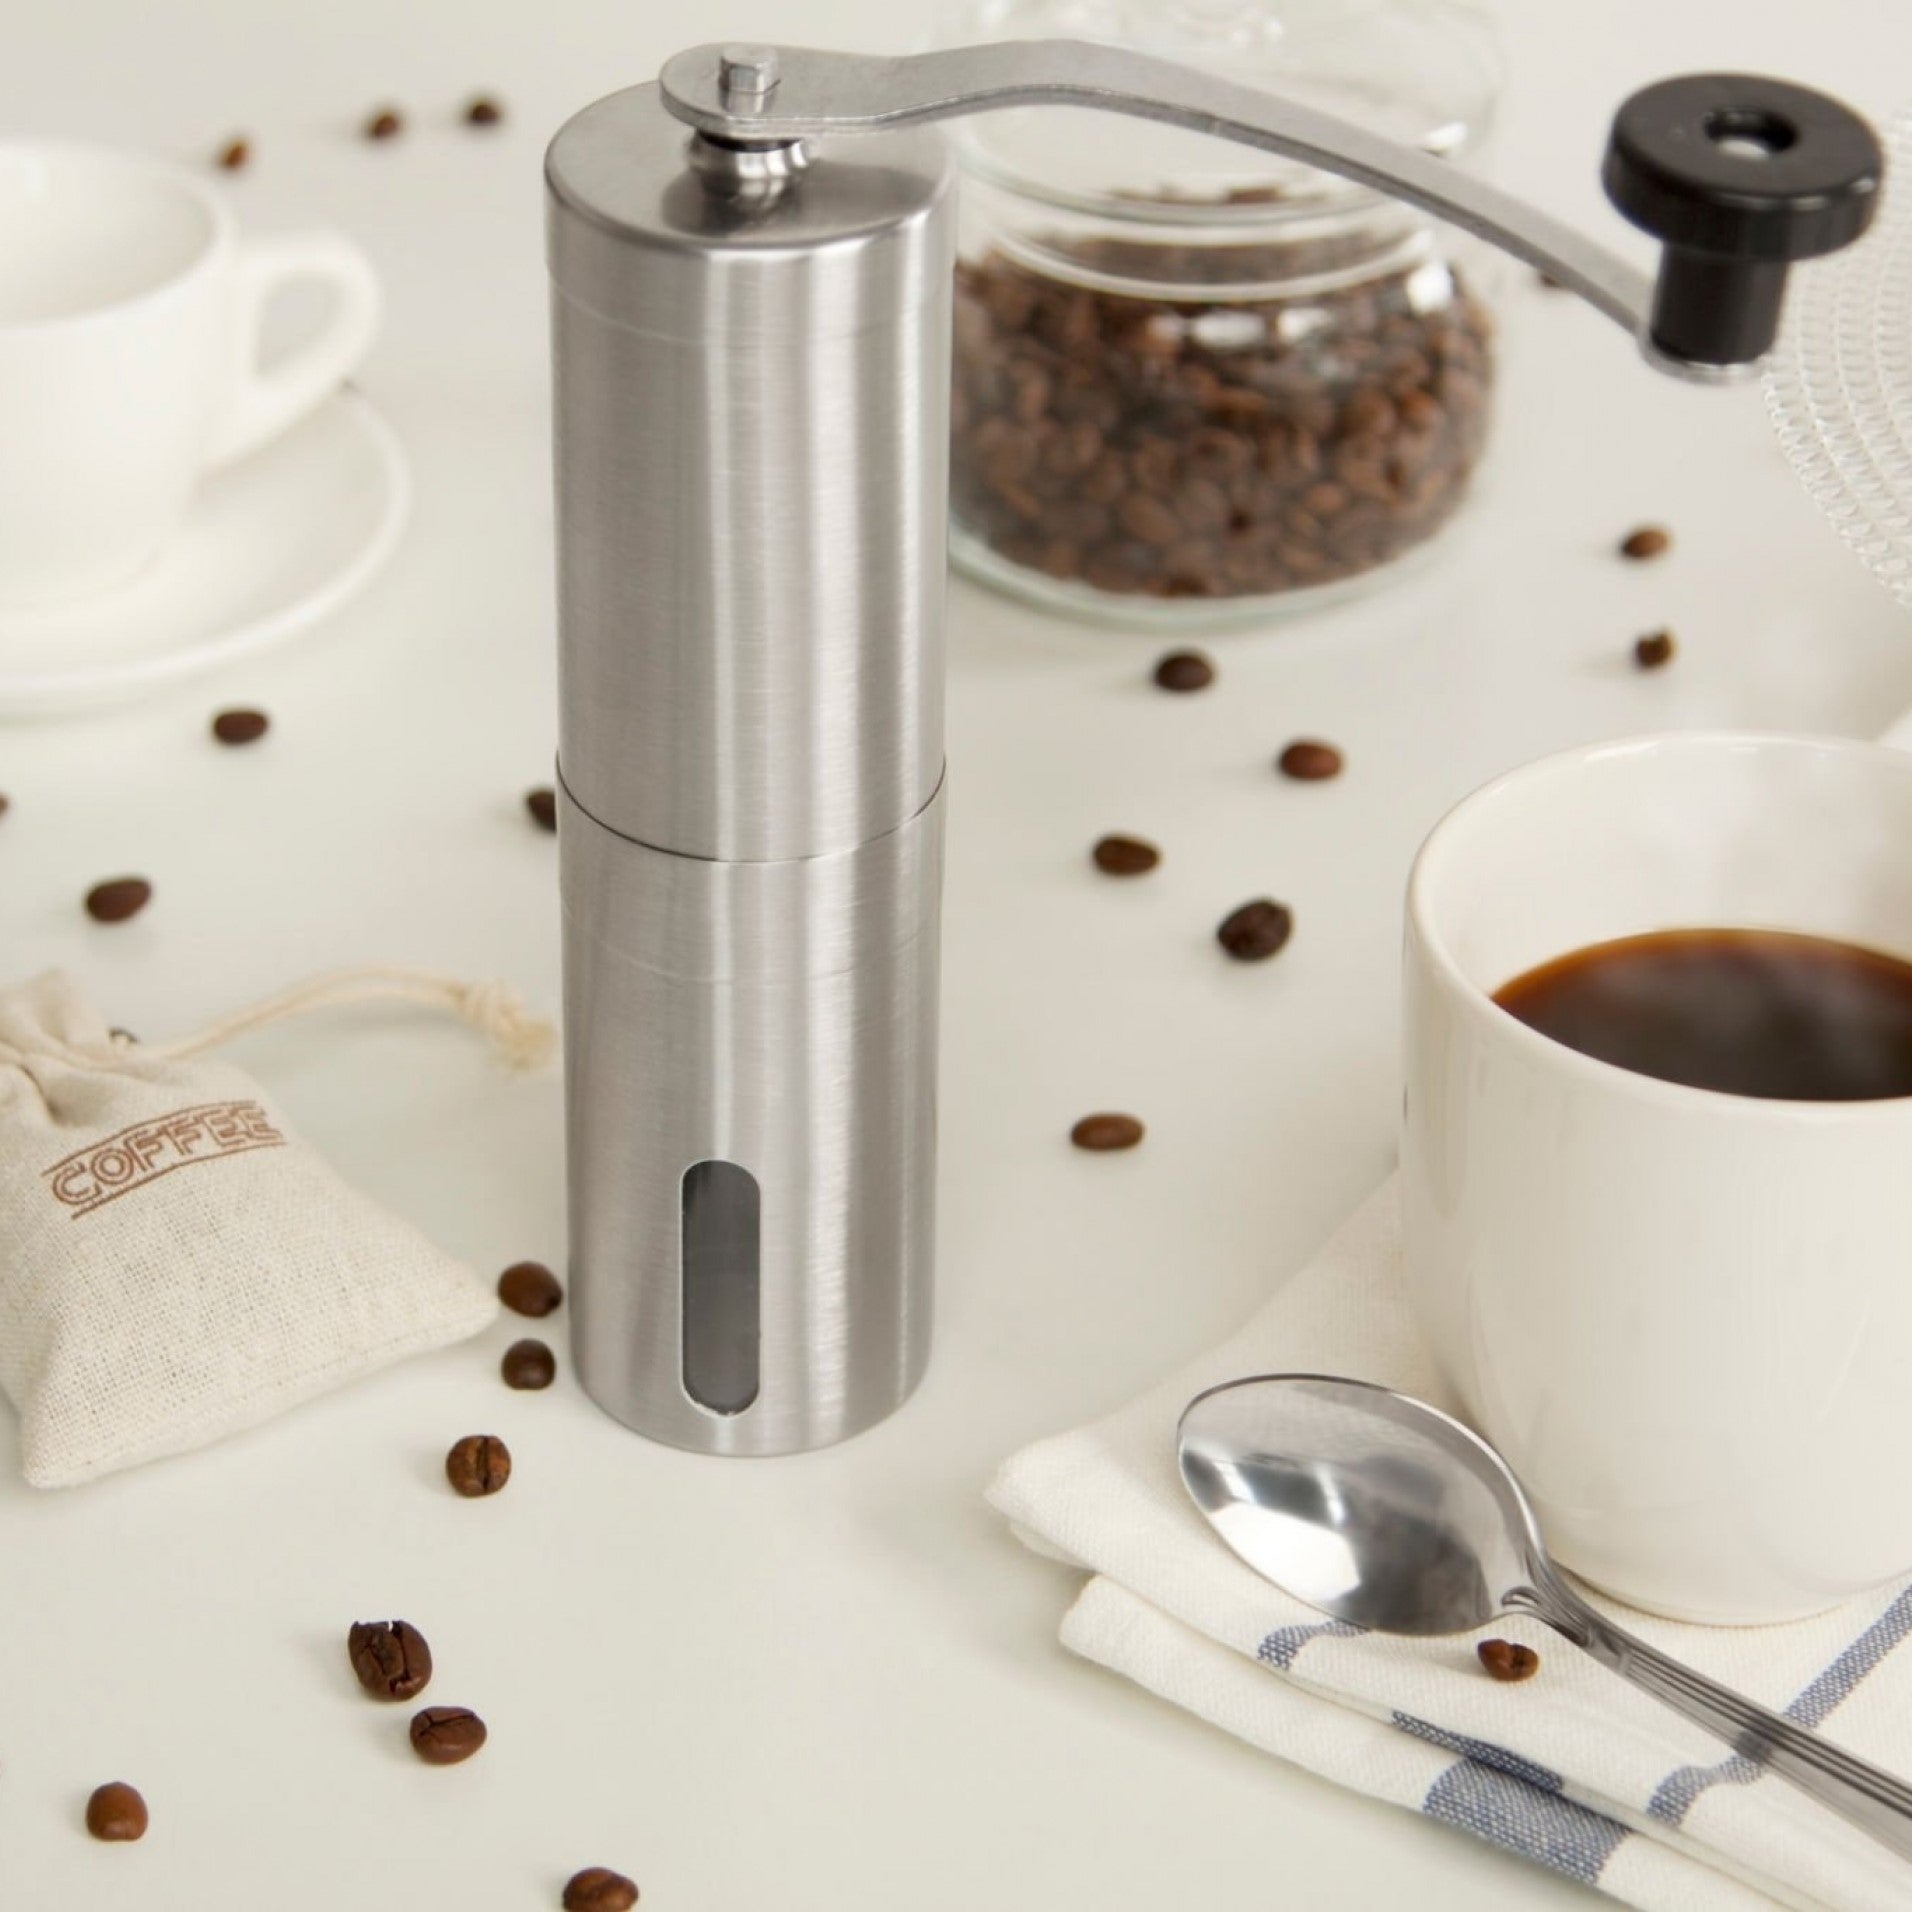 Mill Coffee Bean Grinder: Premium Stainless Steel Design with High-Quality Ceramic Blades